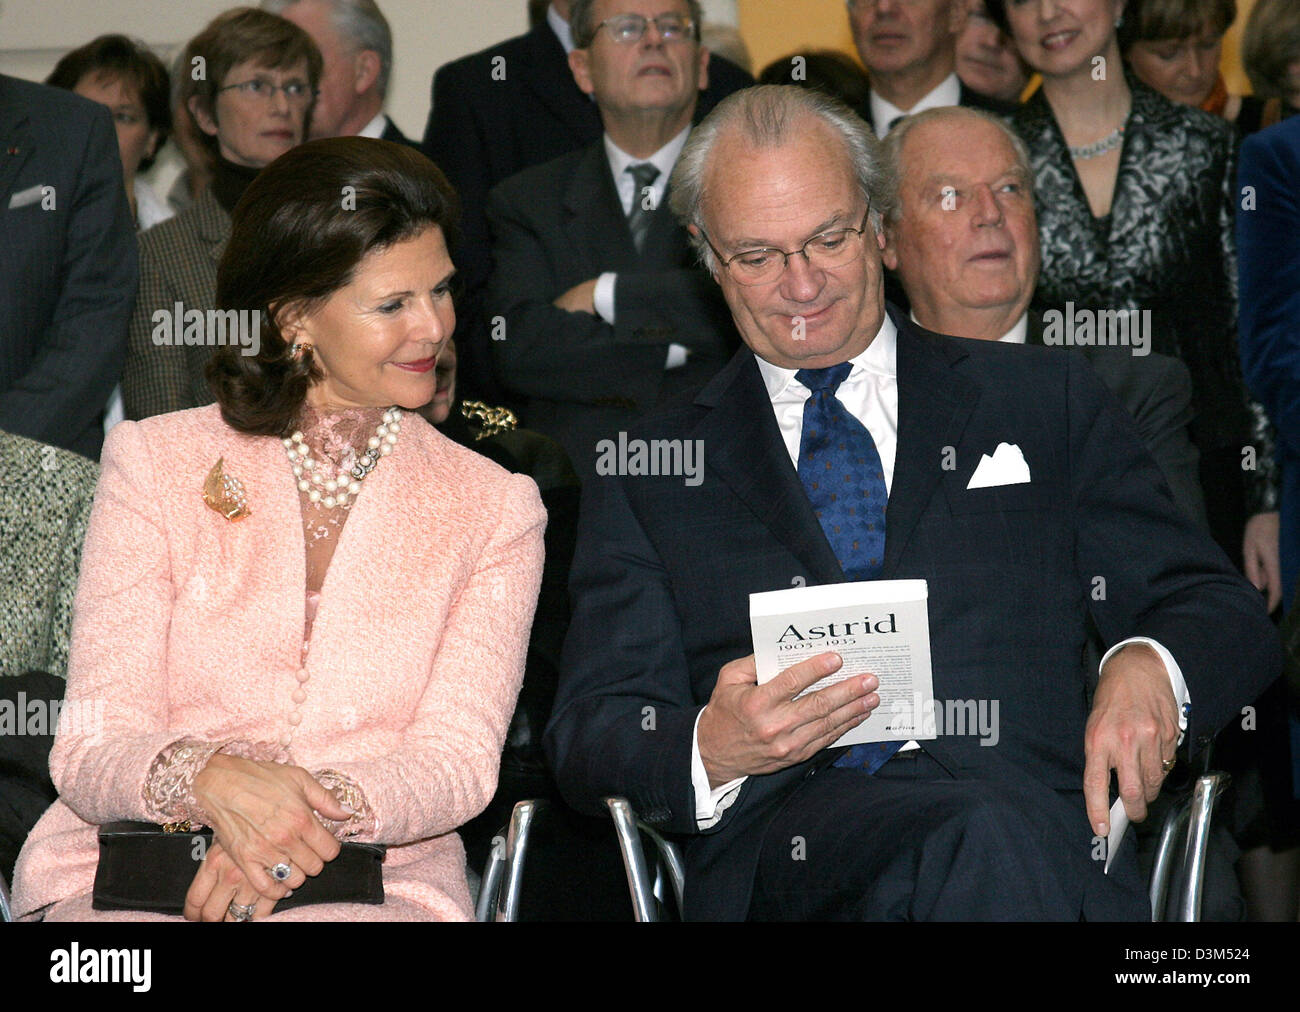 (dpa) - Queen Silvia (L) and King Carl XVI. Gustav of Sweden take part in a function celebrating the 100th birthday of Queen Astrid of Belgium in Brussels, Belgium, Thursday, 17 November 2005. Photo: Albert Nieboer Stock Photo